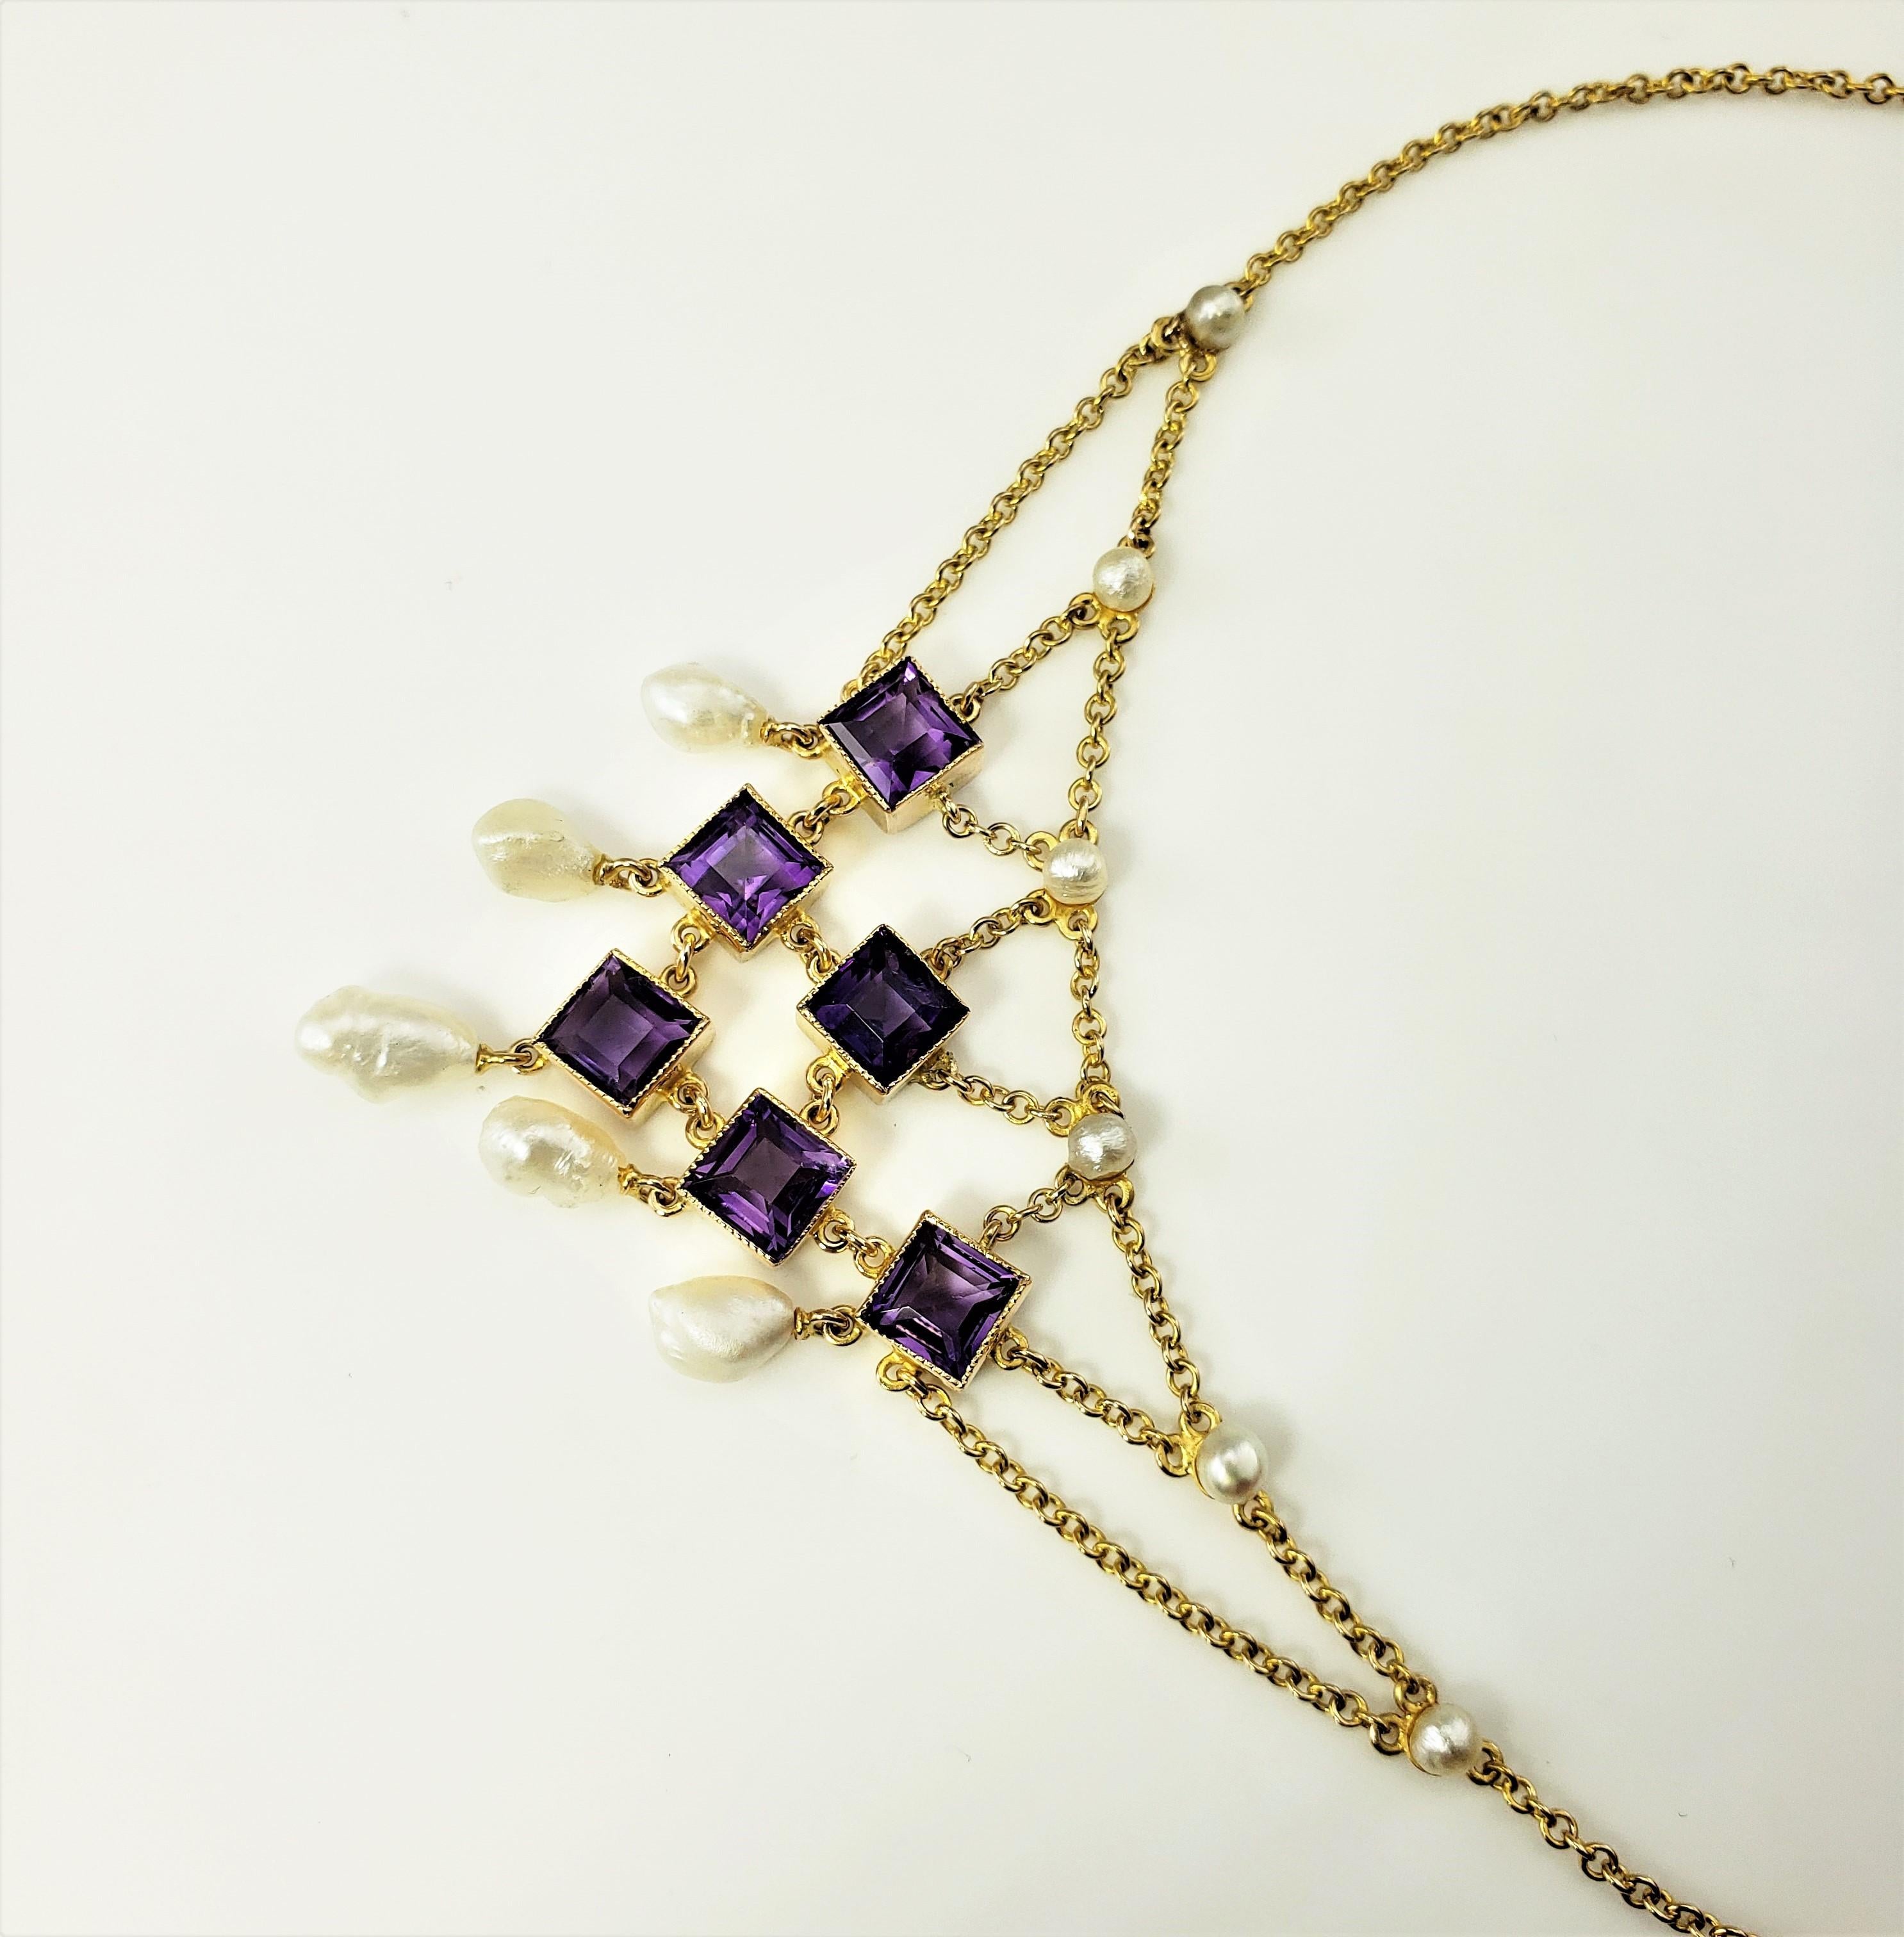 14 Karat Yellow Gold Amethyst and Pearl Bib Necklace-

This lovely bib necklace features six square amethyst stones* and 12 pearls set in classic 14K yellow gold.

*Small surface chips noted to edge of two amethyst stone. Not notable to naked